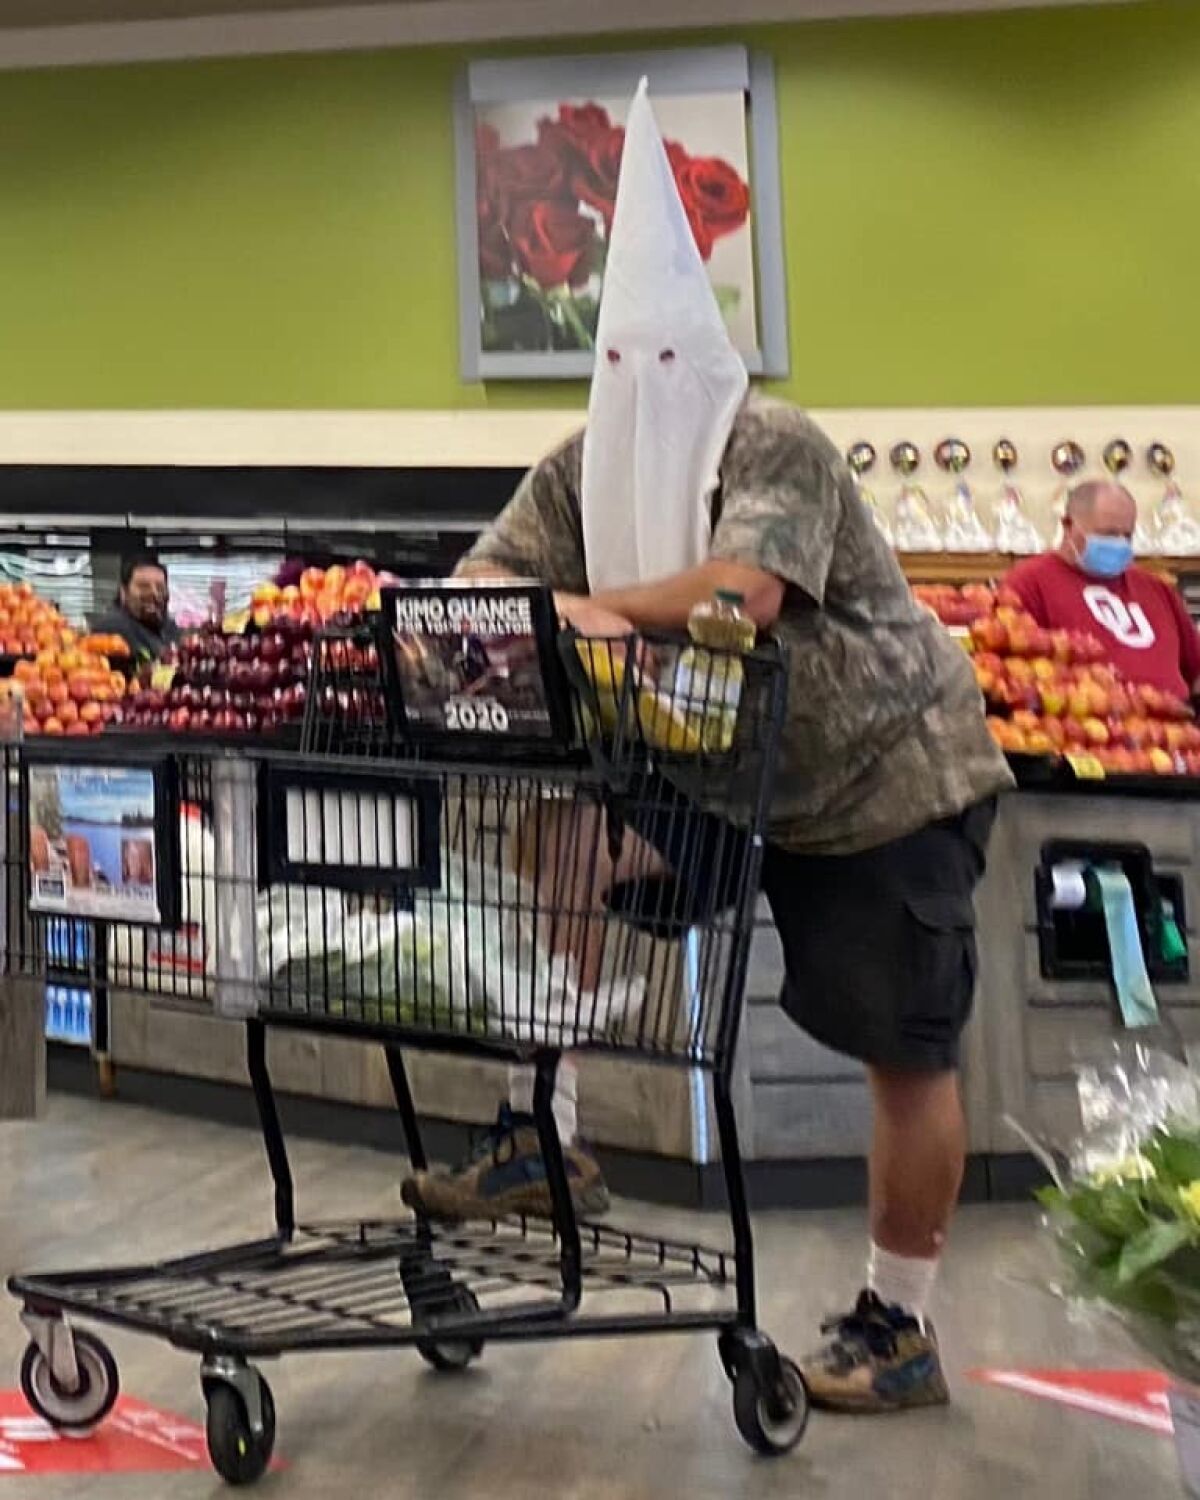 A man was spotted wearing a KKK hood in a Vons grocery store in Santee Saturday.